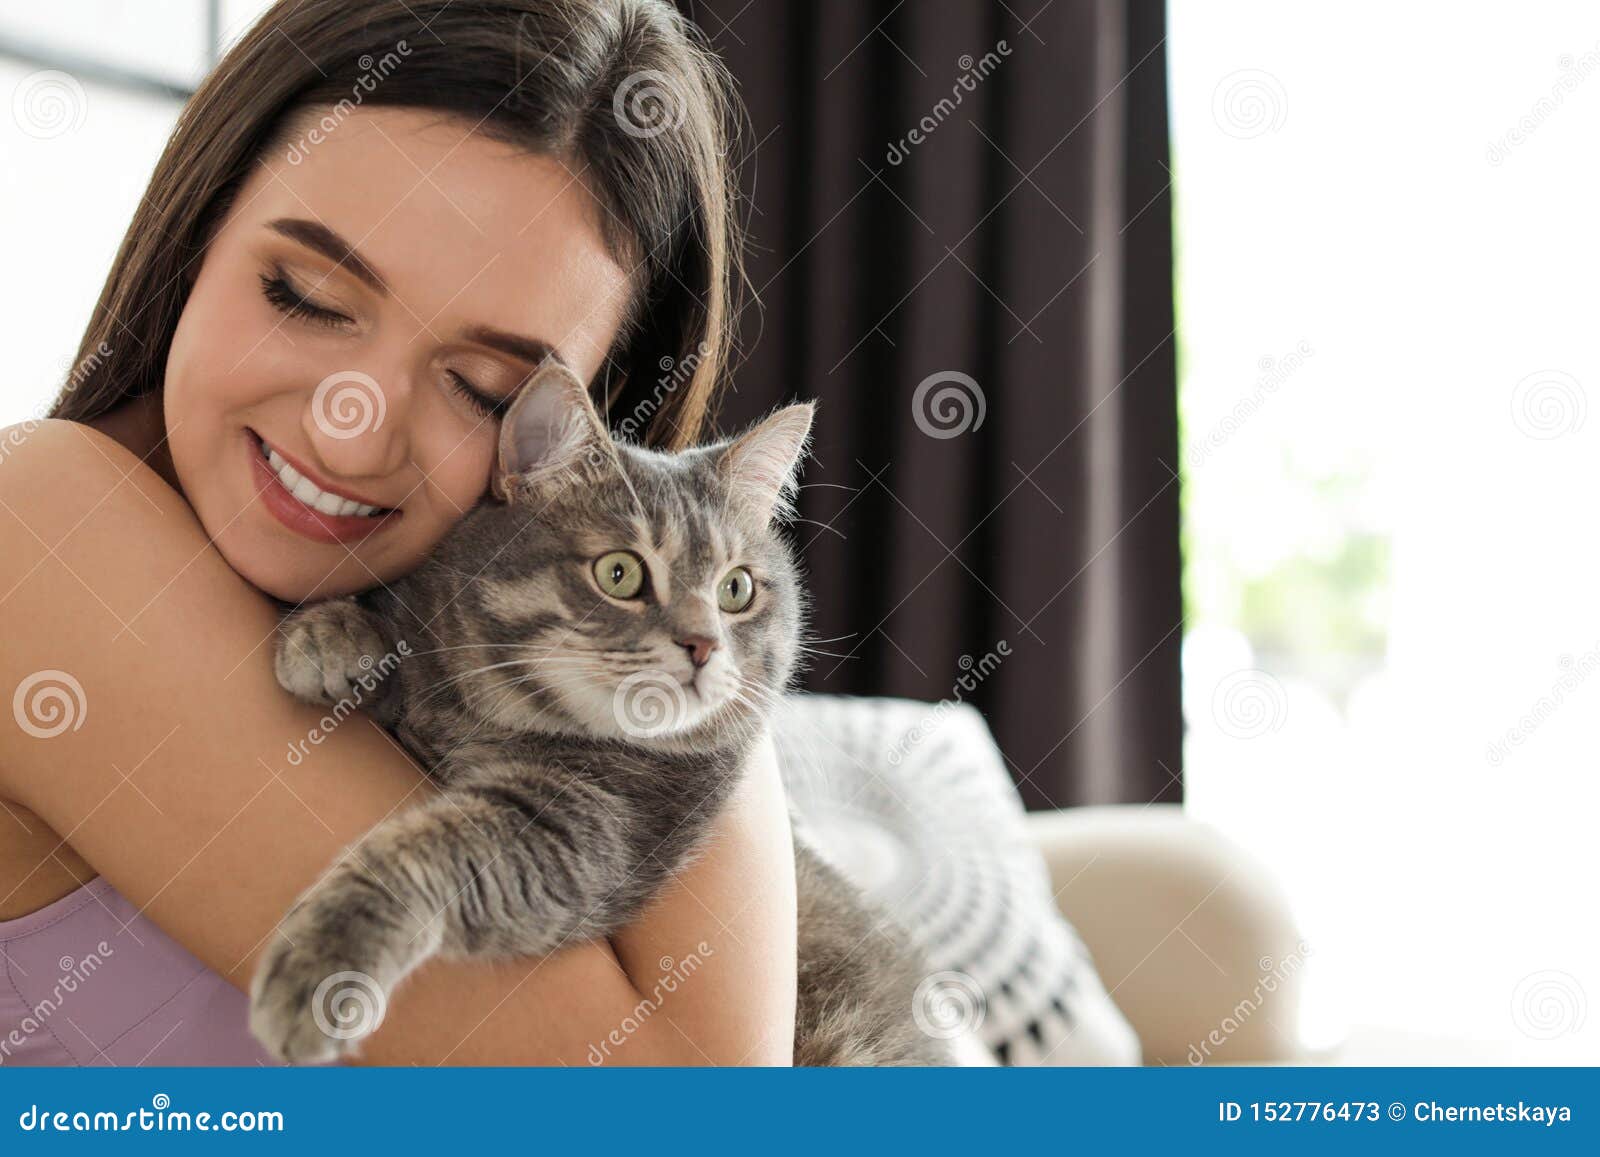 Young Woman with Cute Cat at Home. Pet and Owner Stock Image - Image of ...